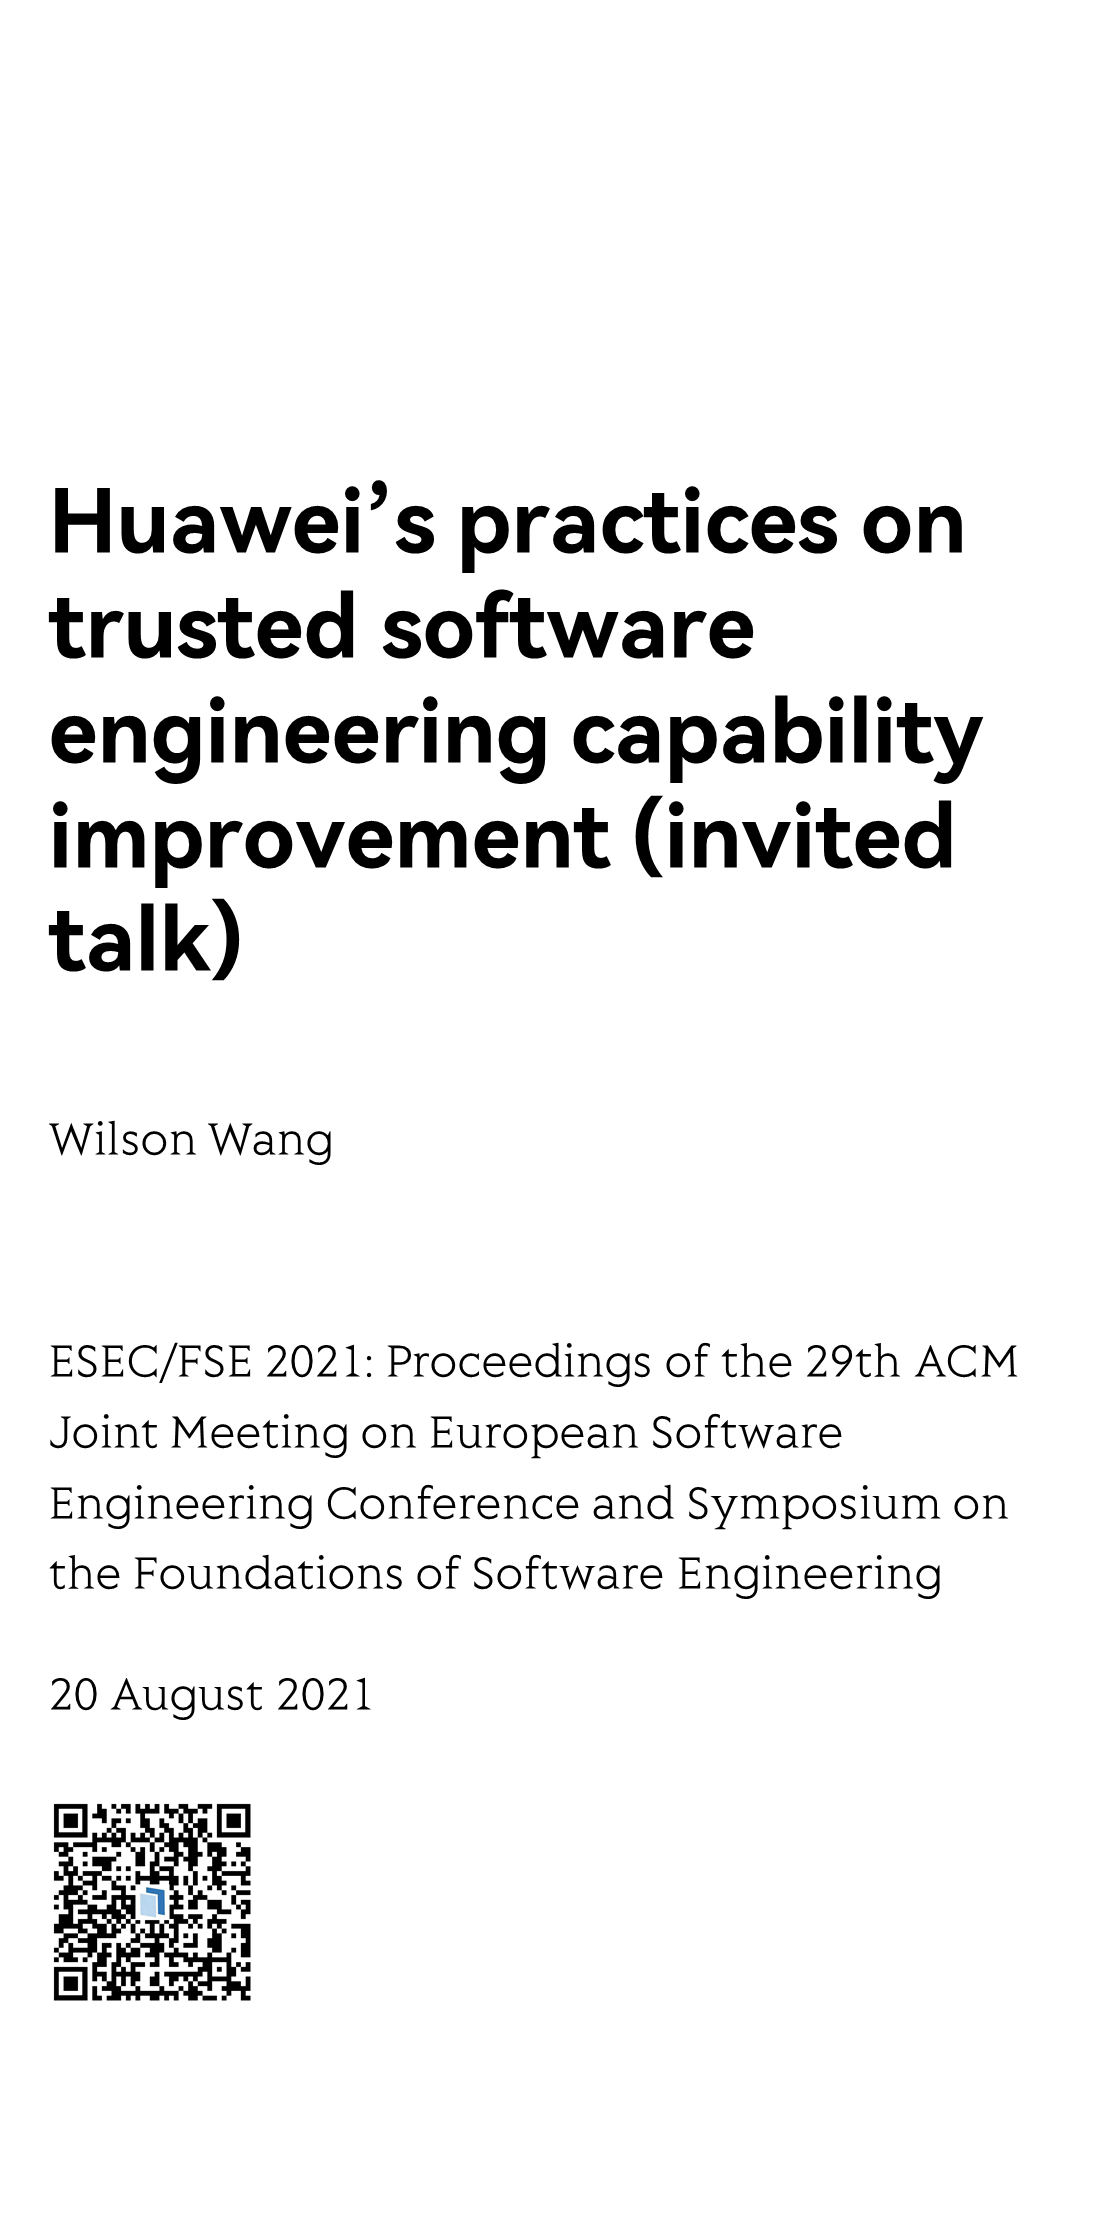 Huawei's practices on trusted software engineering capability improvement (invited talk)_1